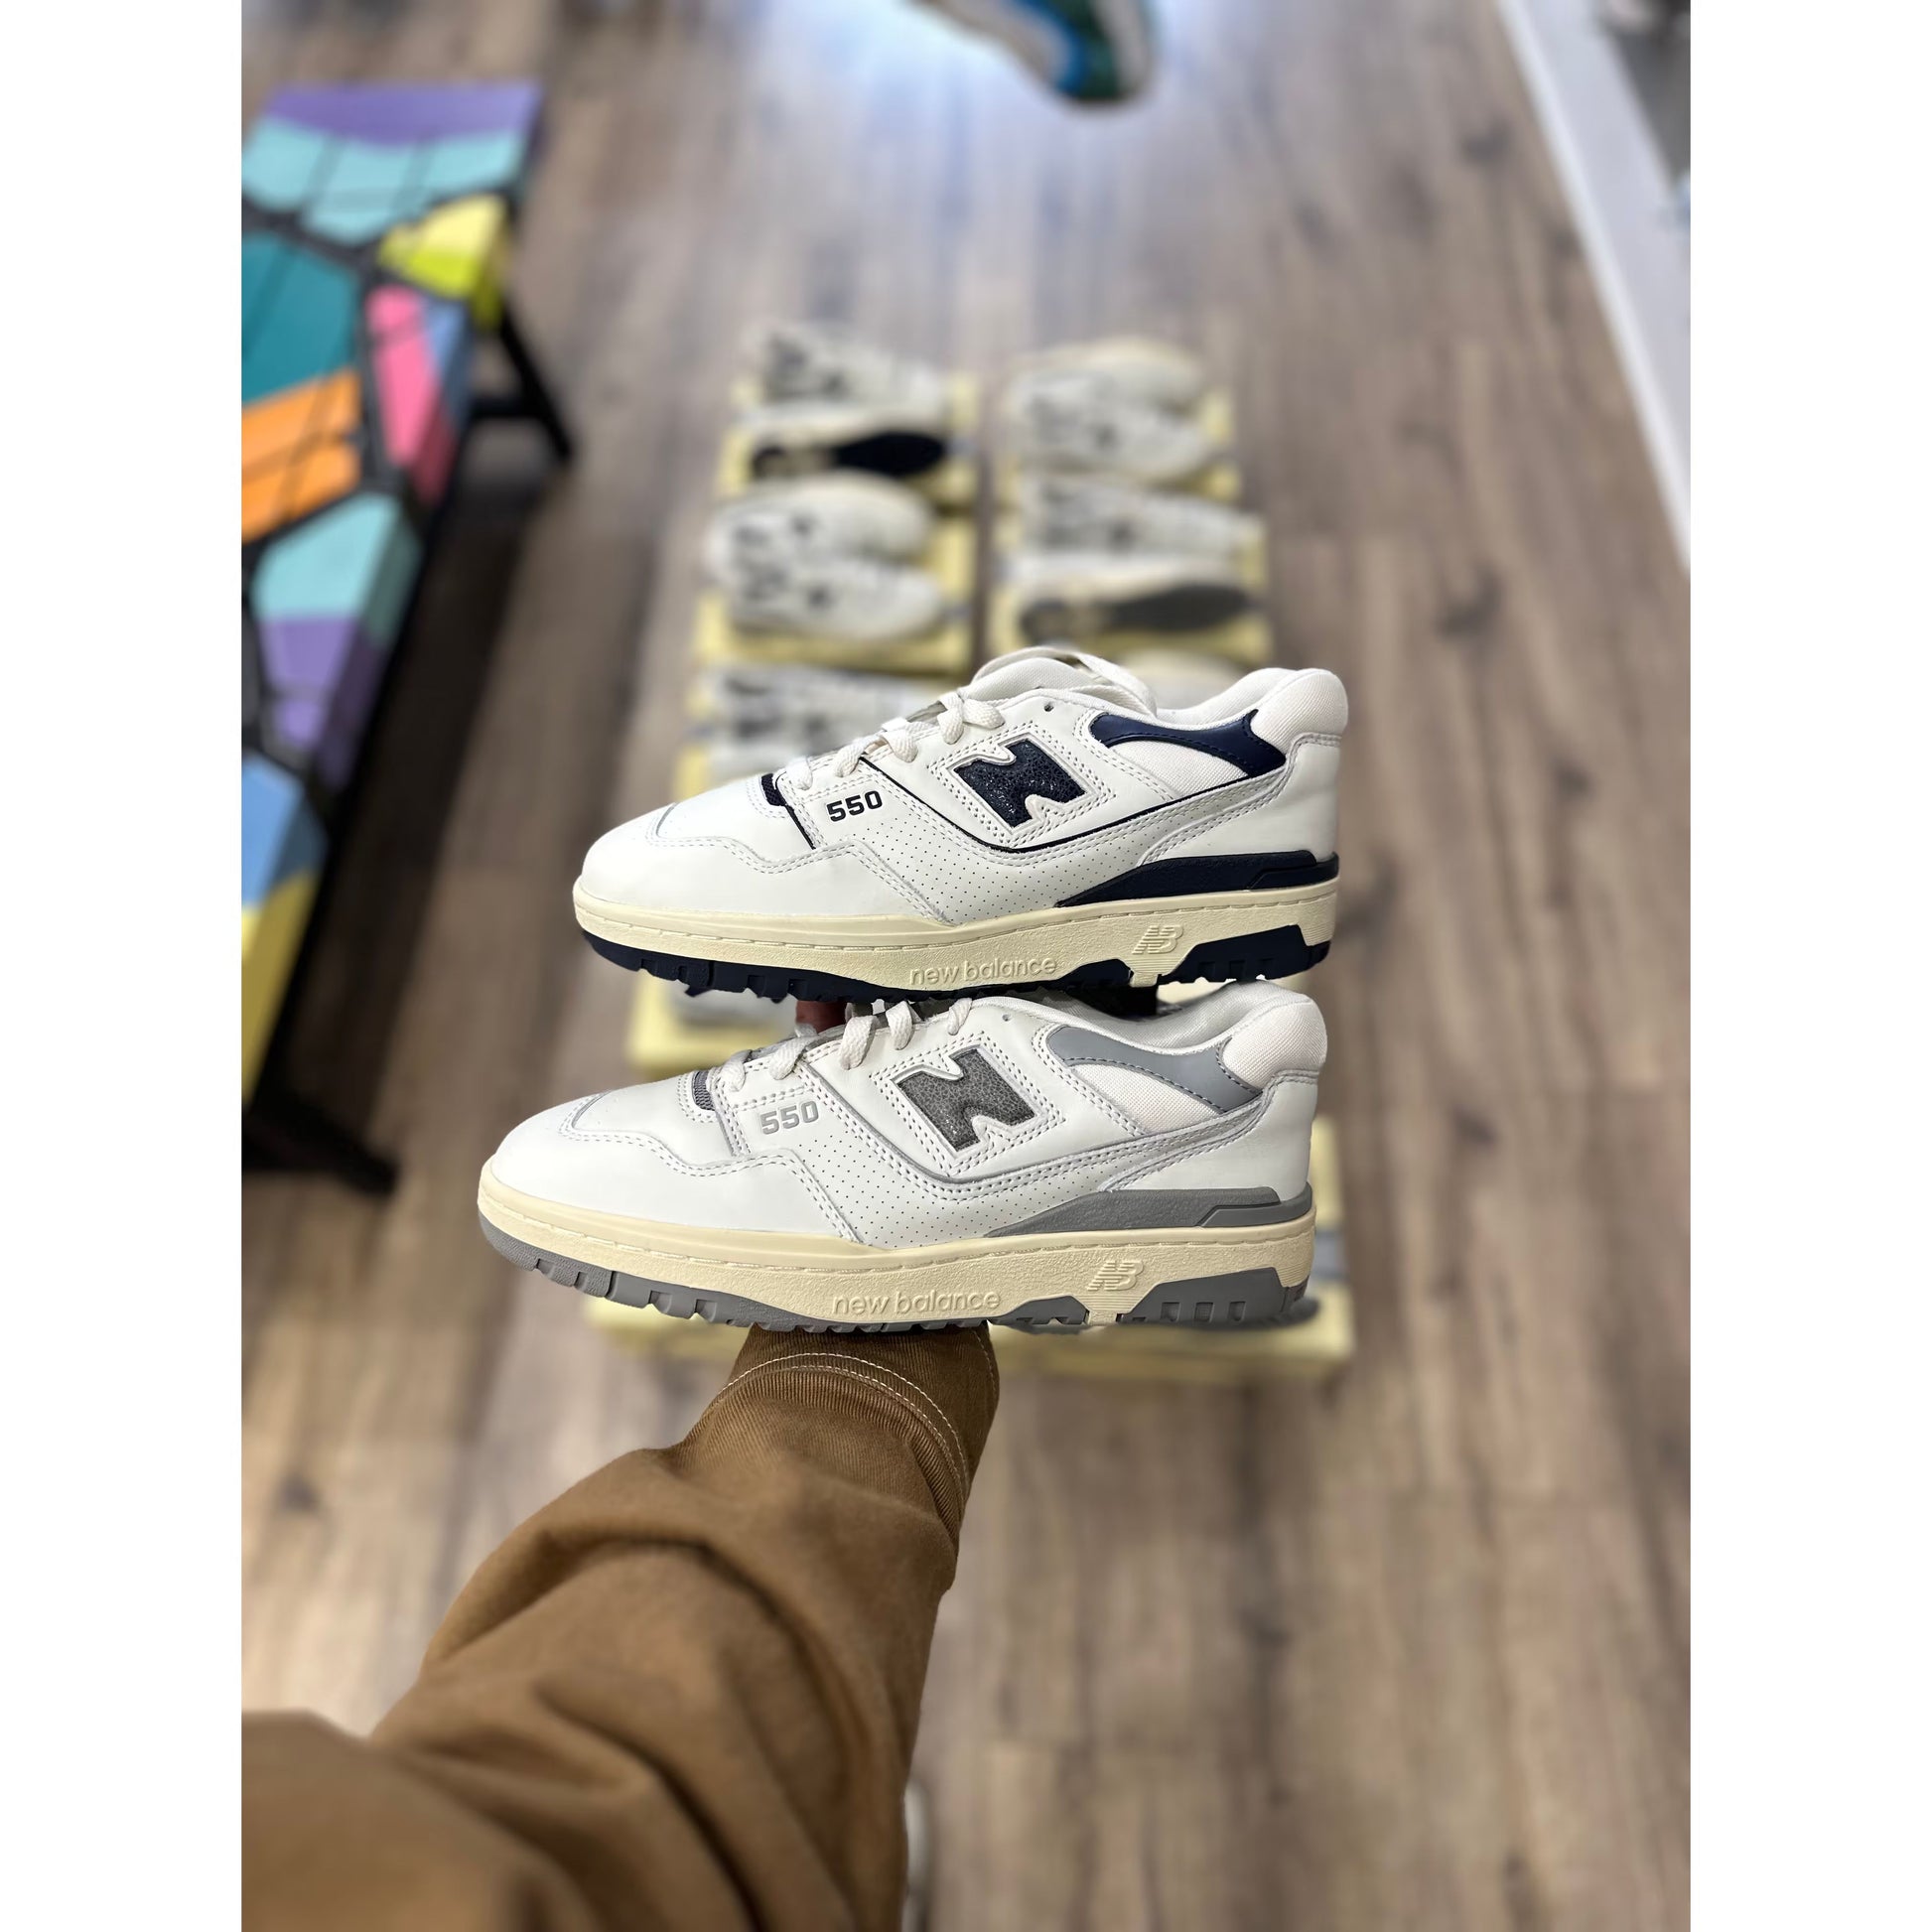 New Balance 550 Aime Leon Dore White Navy by New Balance from £150.00